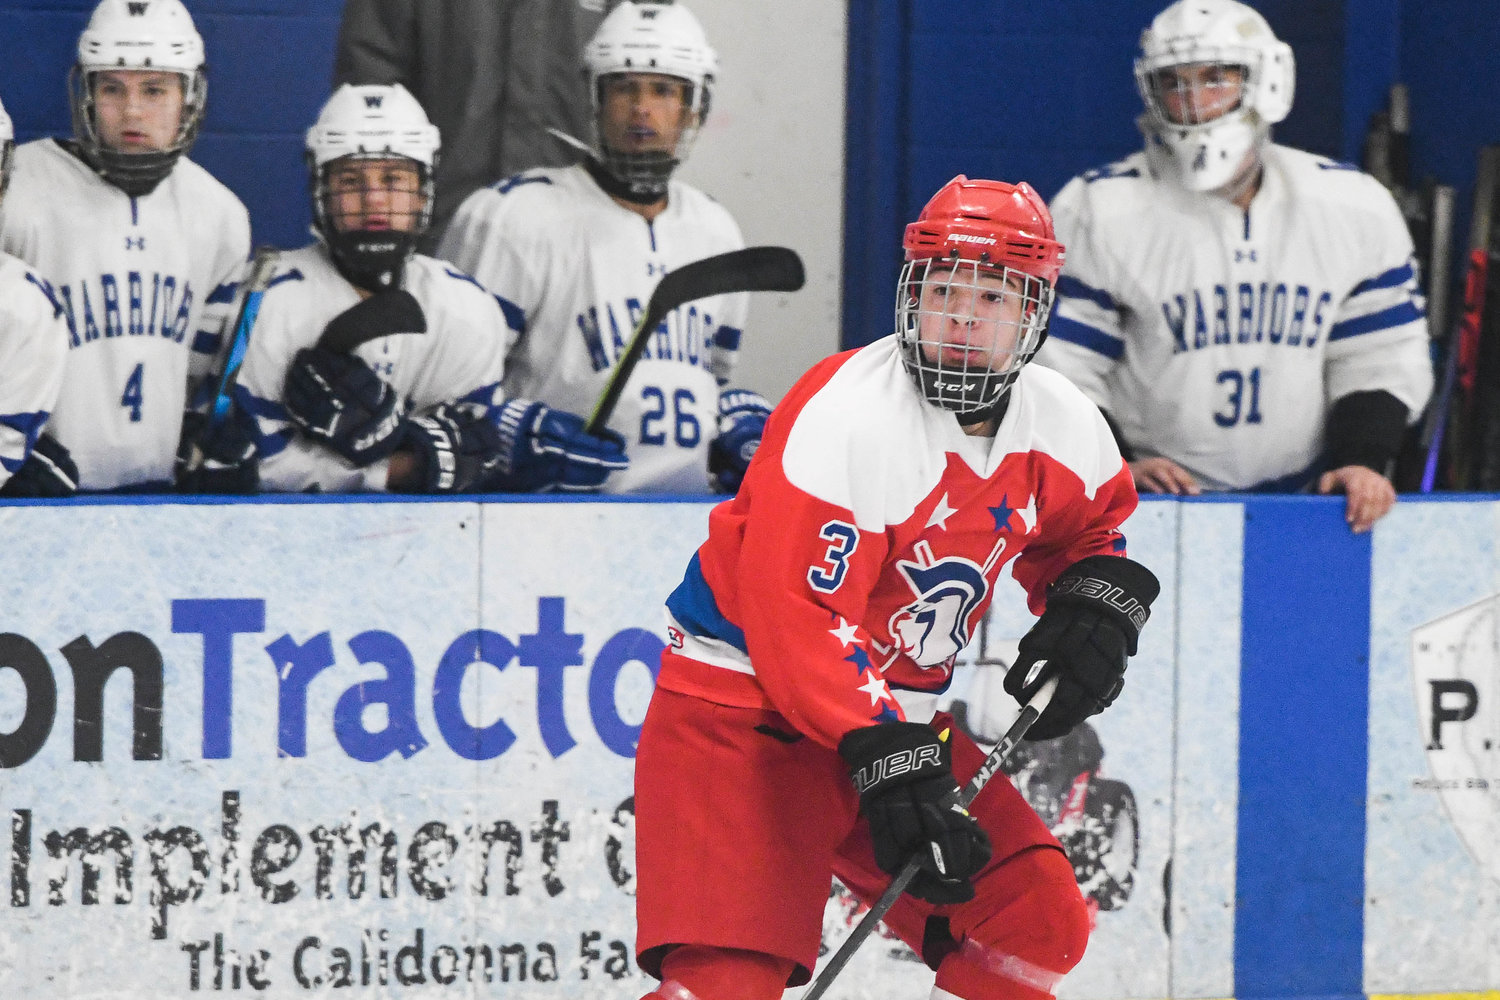 New Hartford player Garrett Smith flips the puck over the blue line against Whitesboro on Tuesday at the Whitestown Community Ice Rink. The Spartans won 1-0 on the road.